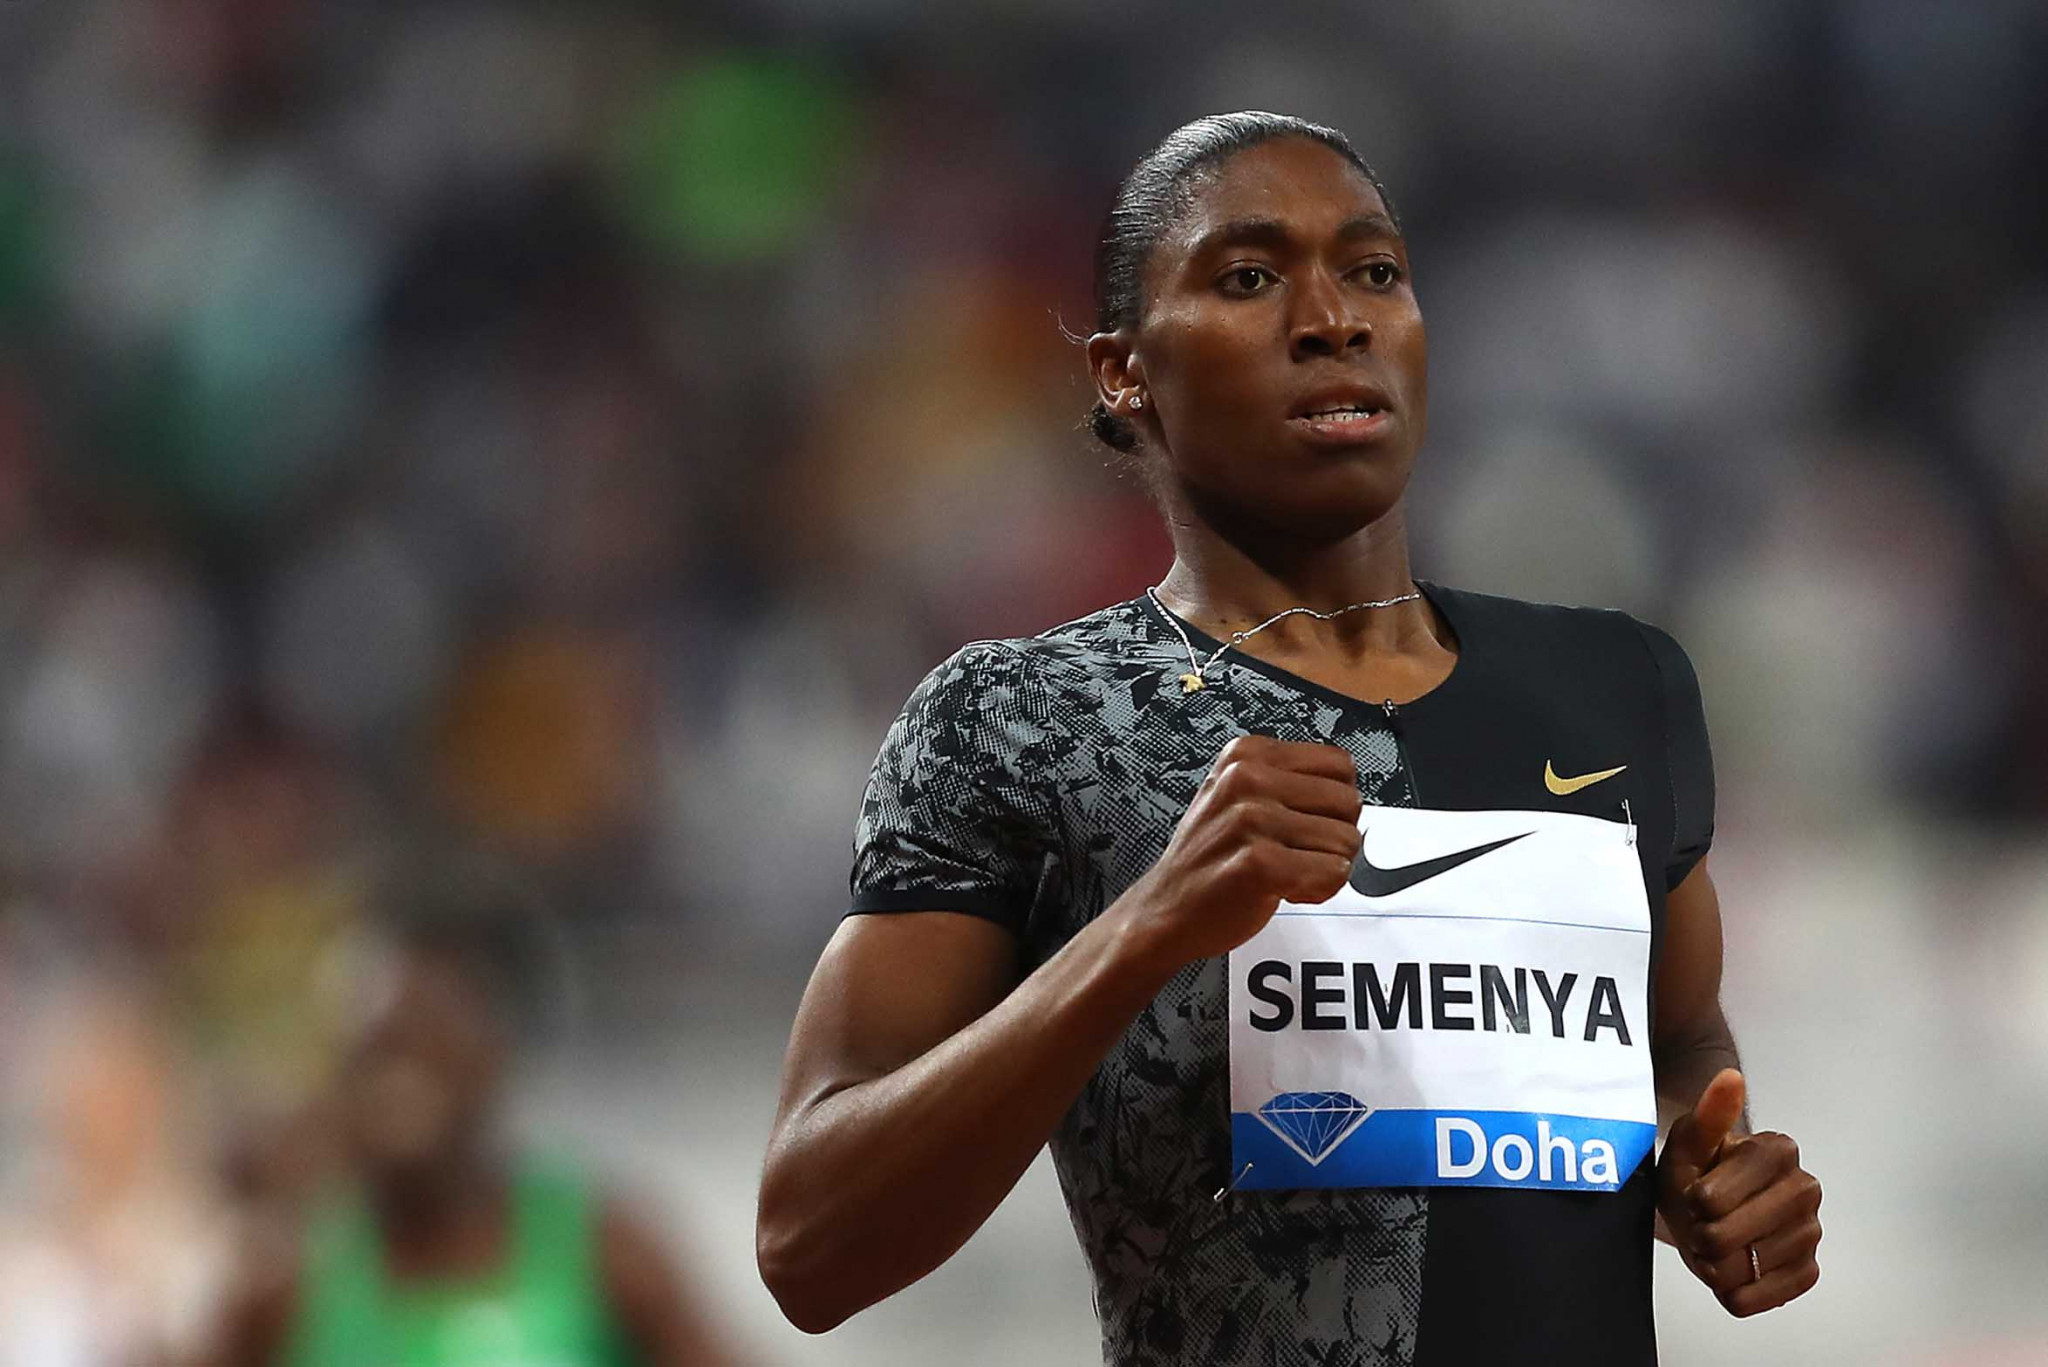 Semenya files appeal against CAS decision to Federal Supreme Court of Switzerland